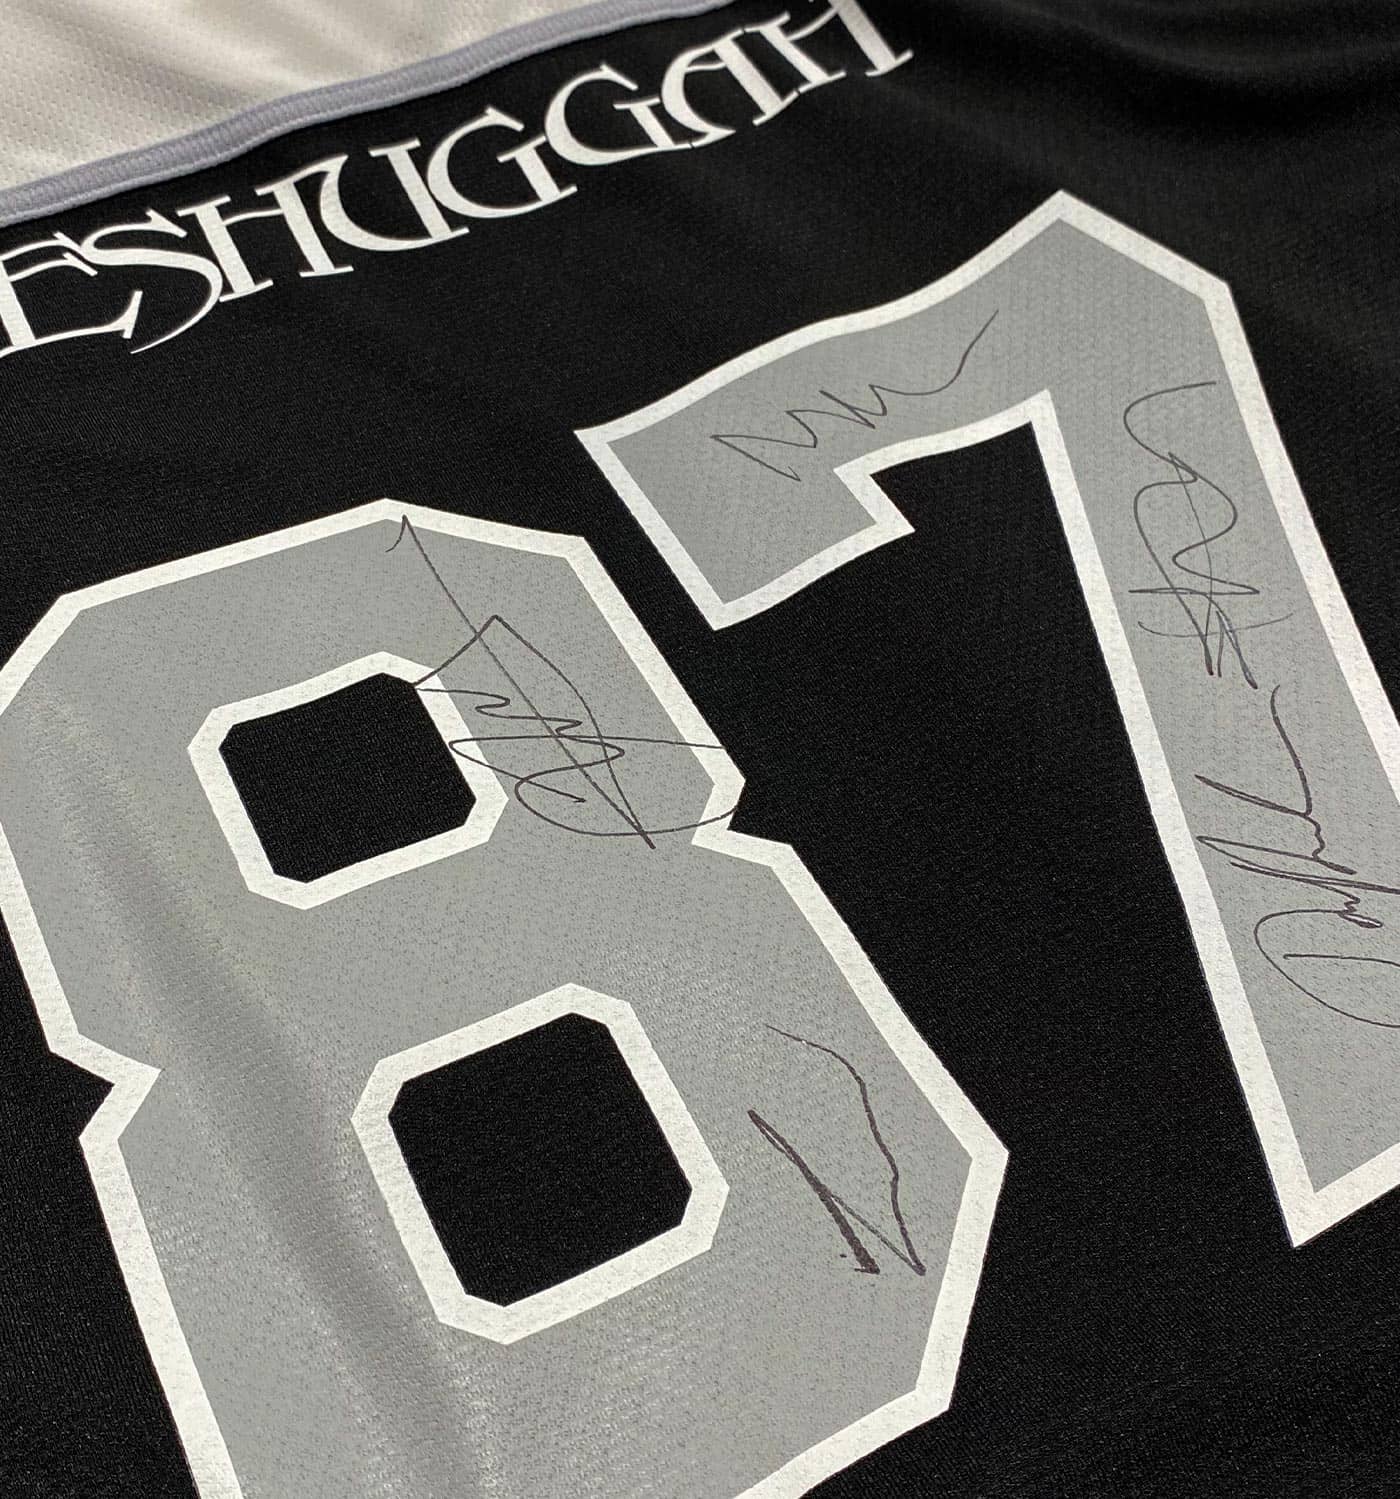 MESHUGGAH 'THIS SPITEFUL SKATE' limited edition autographed hockey jersey in black, white back view, and grey